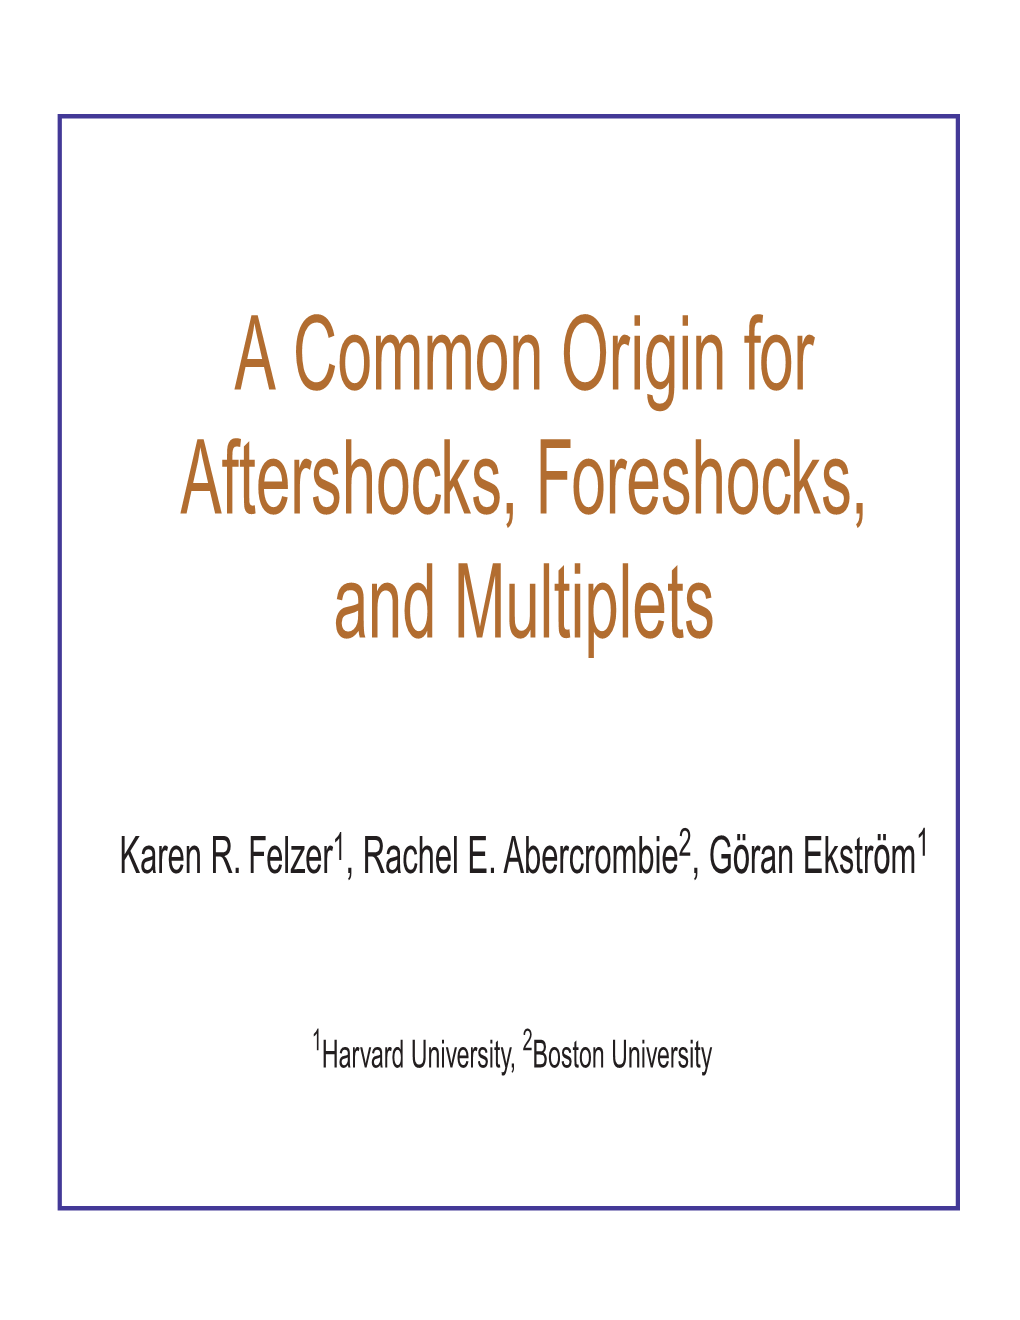 A Common Origin for Aftershocks, Foreshocks, and Multiplets